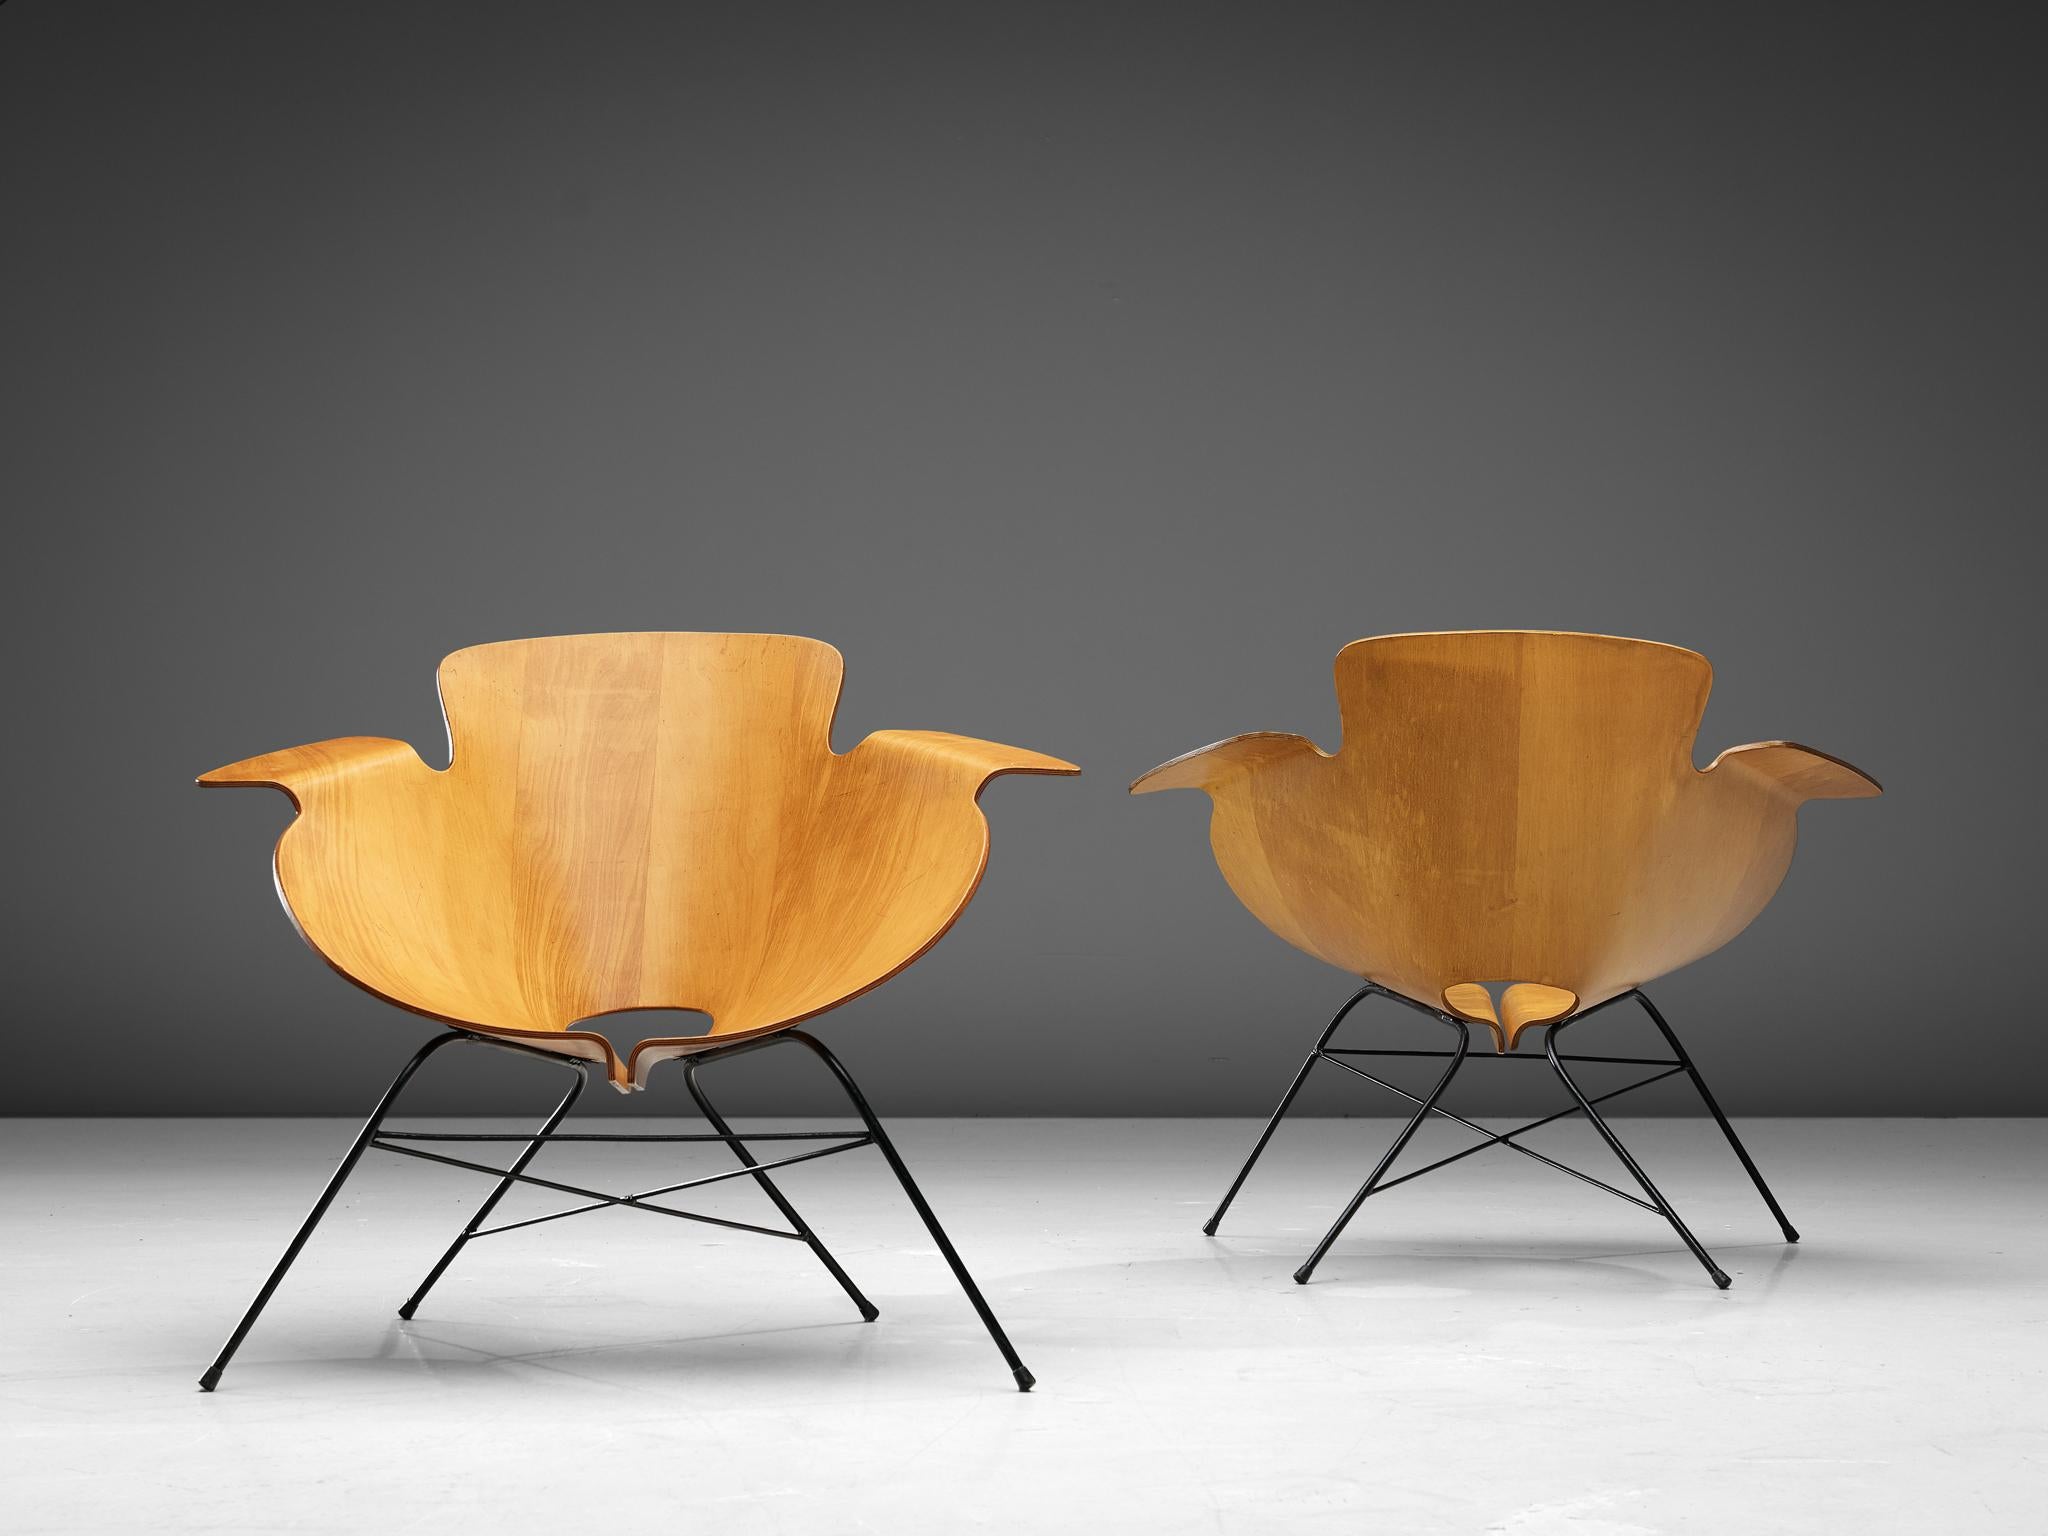 Eugenio Gerli for Società Compensati Curvati, pair of lounge chairs, walnut, plywood, metal, Italy, 1958

A dynamic pair of easy chairs in plywood and black coated metal. The seats are veneered in walnut that shows a lovely natural grain. The shell